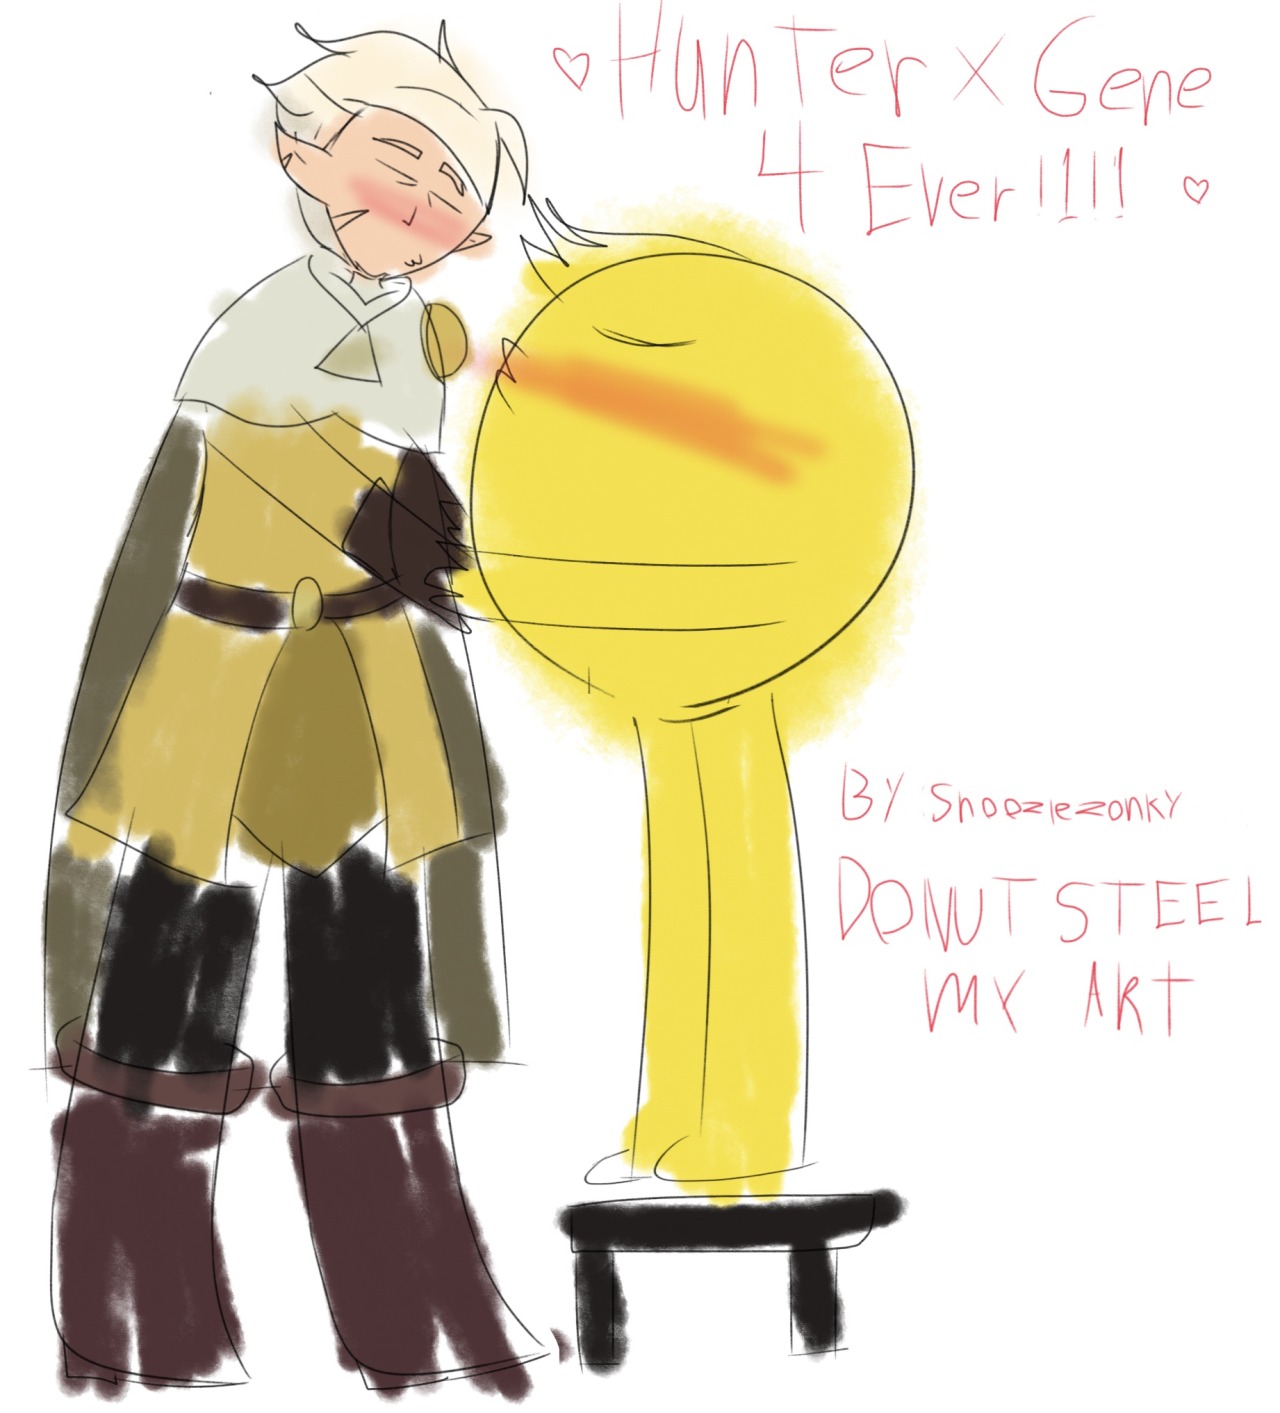 Saw @proship-luz-noceda ‘s hunter x gene post and got inspired. #this is a joke i swear  #i tried to make it look like an old cringy deviantart post from the 2010’s  #think i turned out hilarious #snoozlezonkyartz #hunter x gene #owl house#emoji movie#joke art